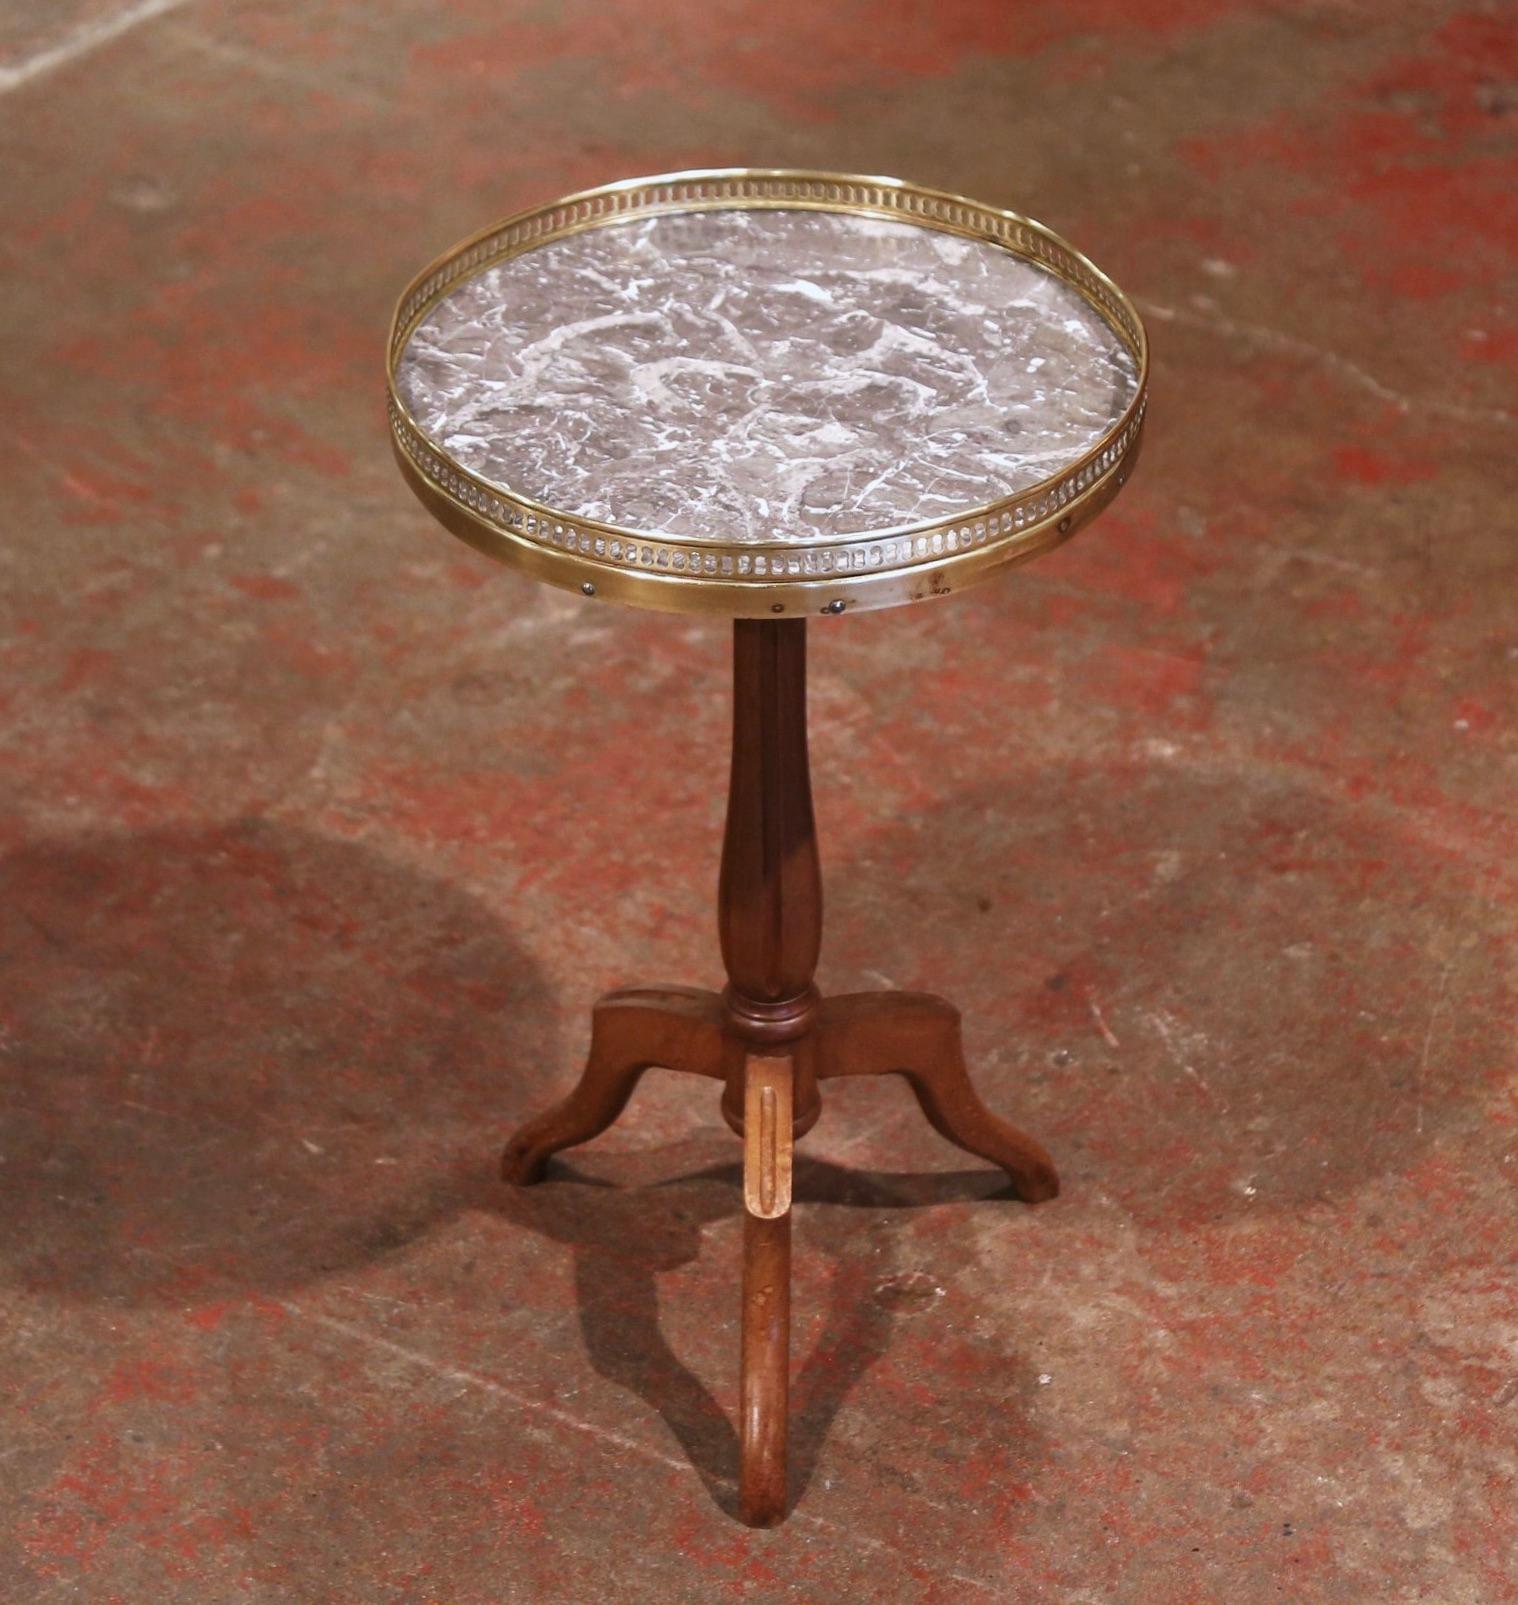 This elegant antique fruitwood and marble table was created in France, circa 1920. The pedestal stands on an intricate turned stem ending with three legs. The top is dressed with a circular variegated grey marble set inside a decorative pierced